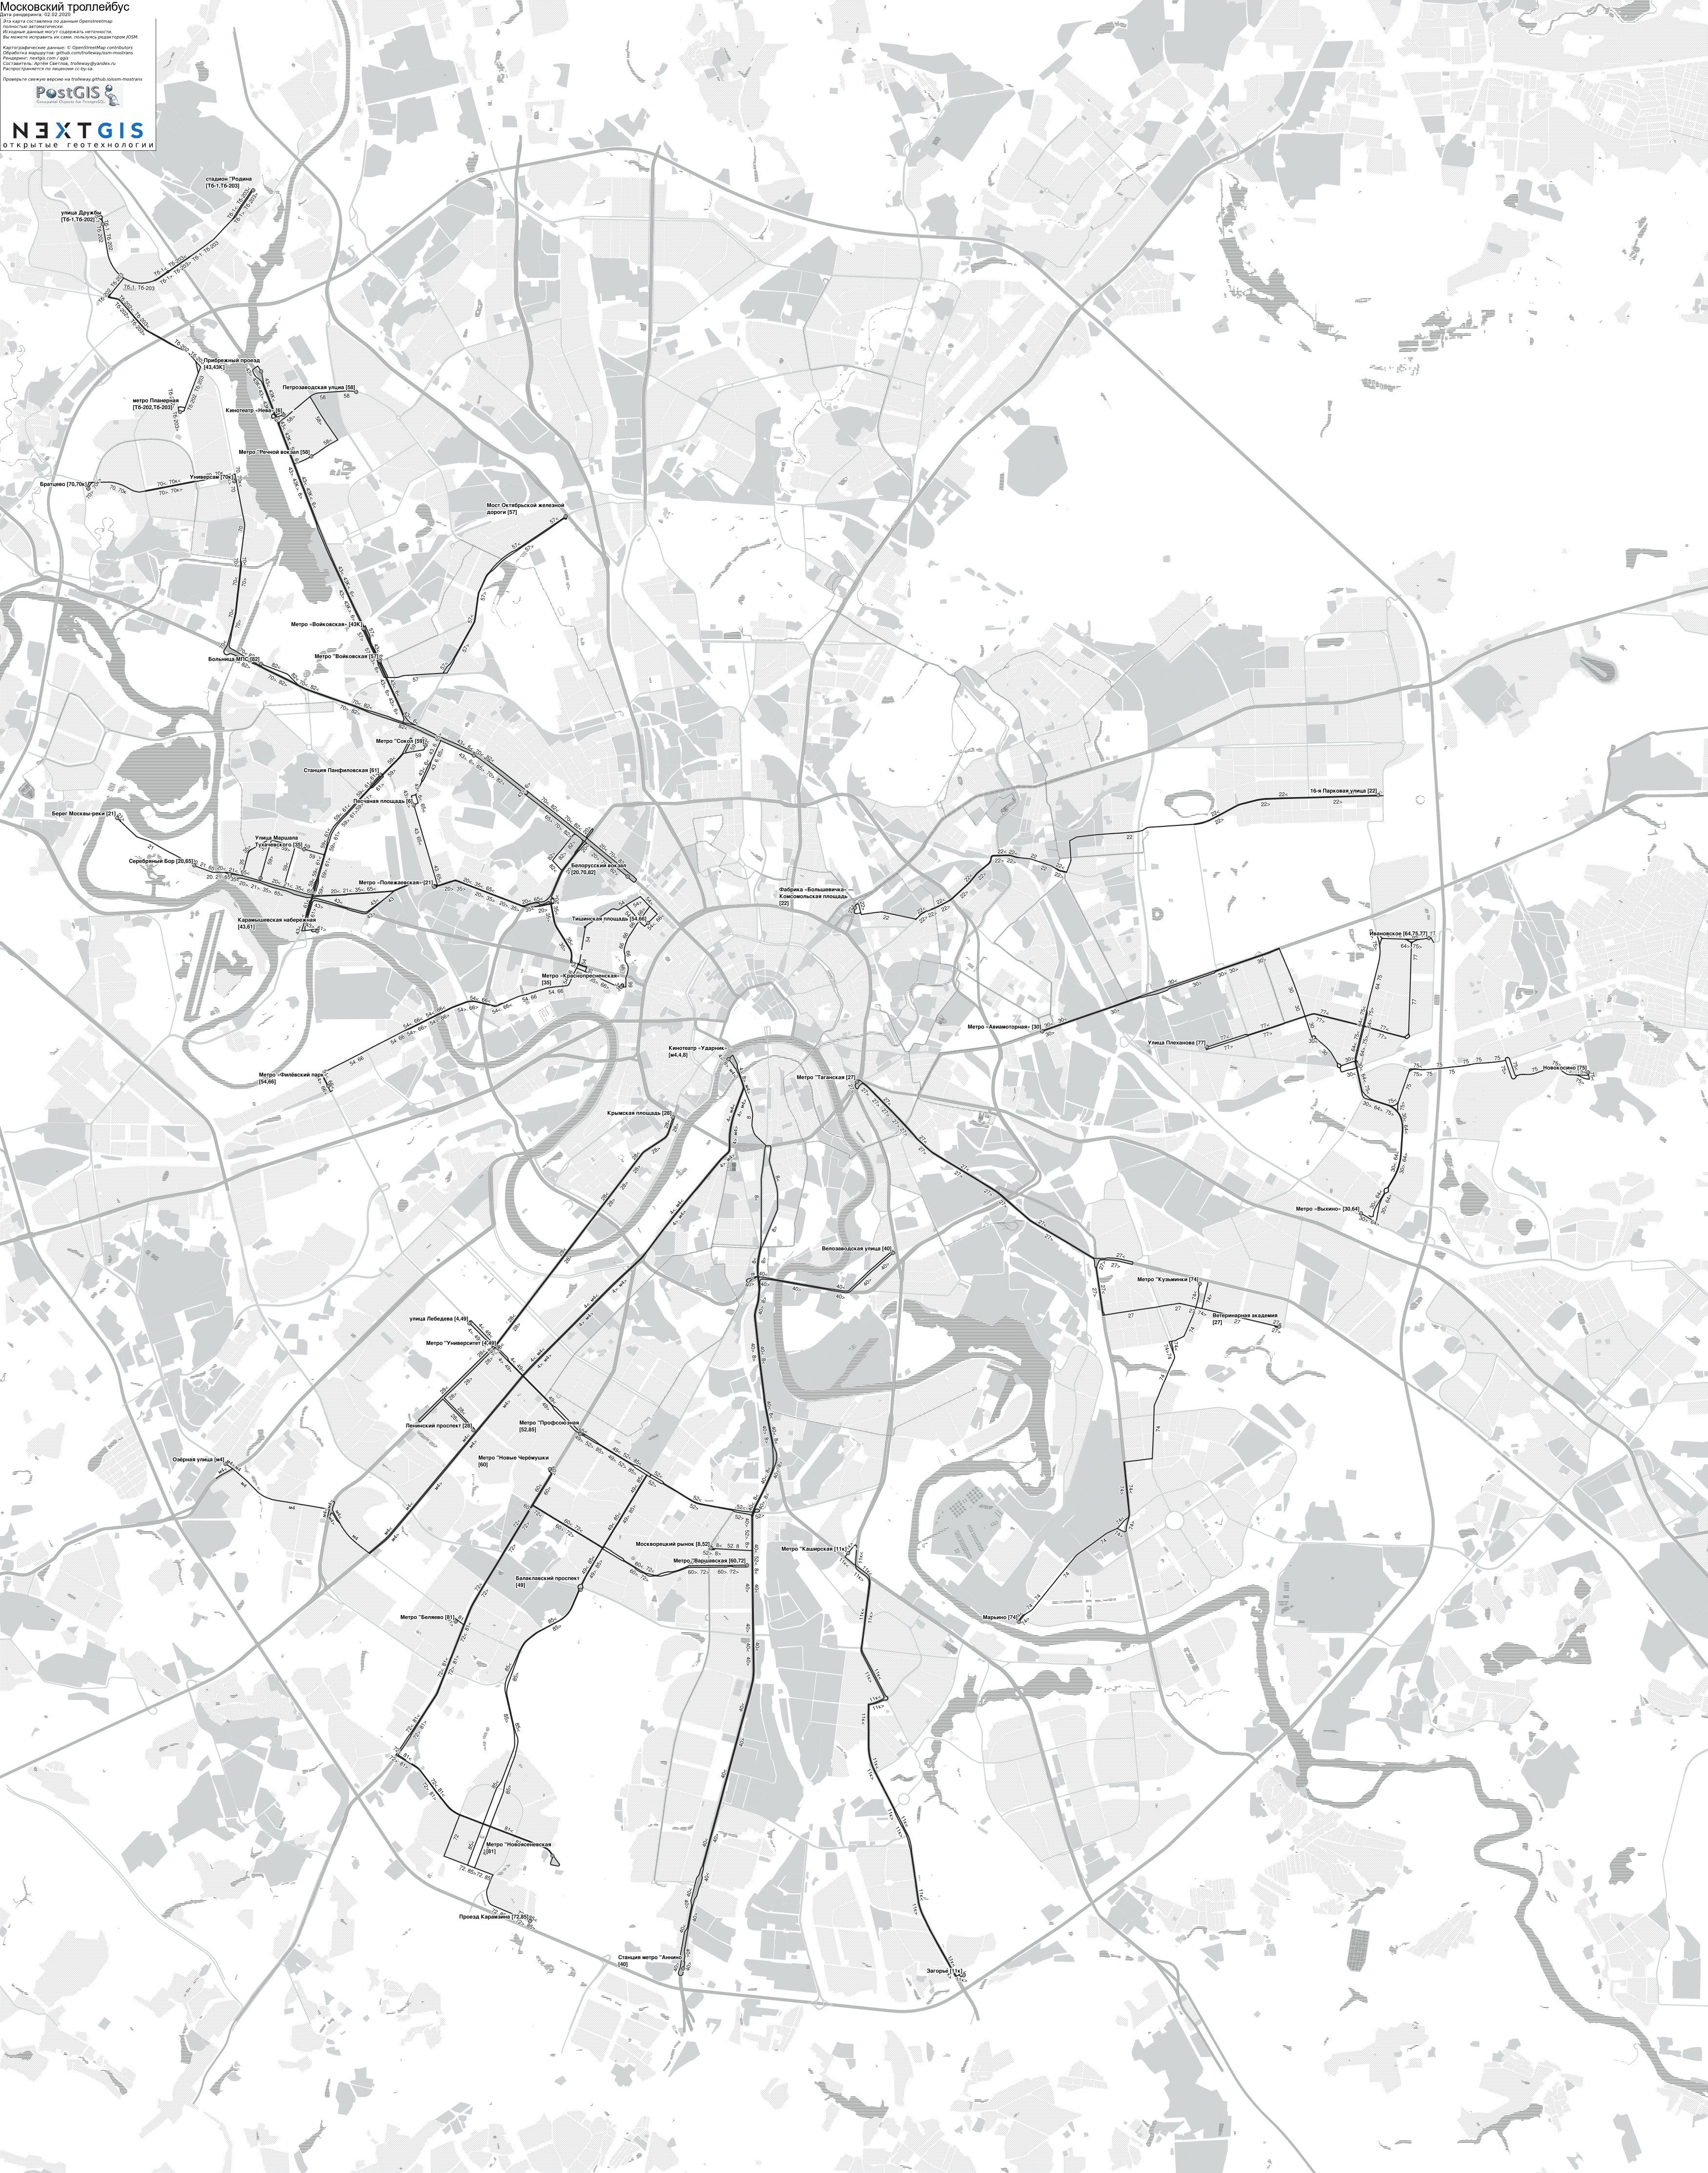 Moscow — Citywide Maps; Maps made with OpenStreetMap